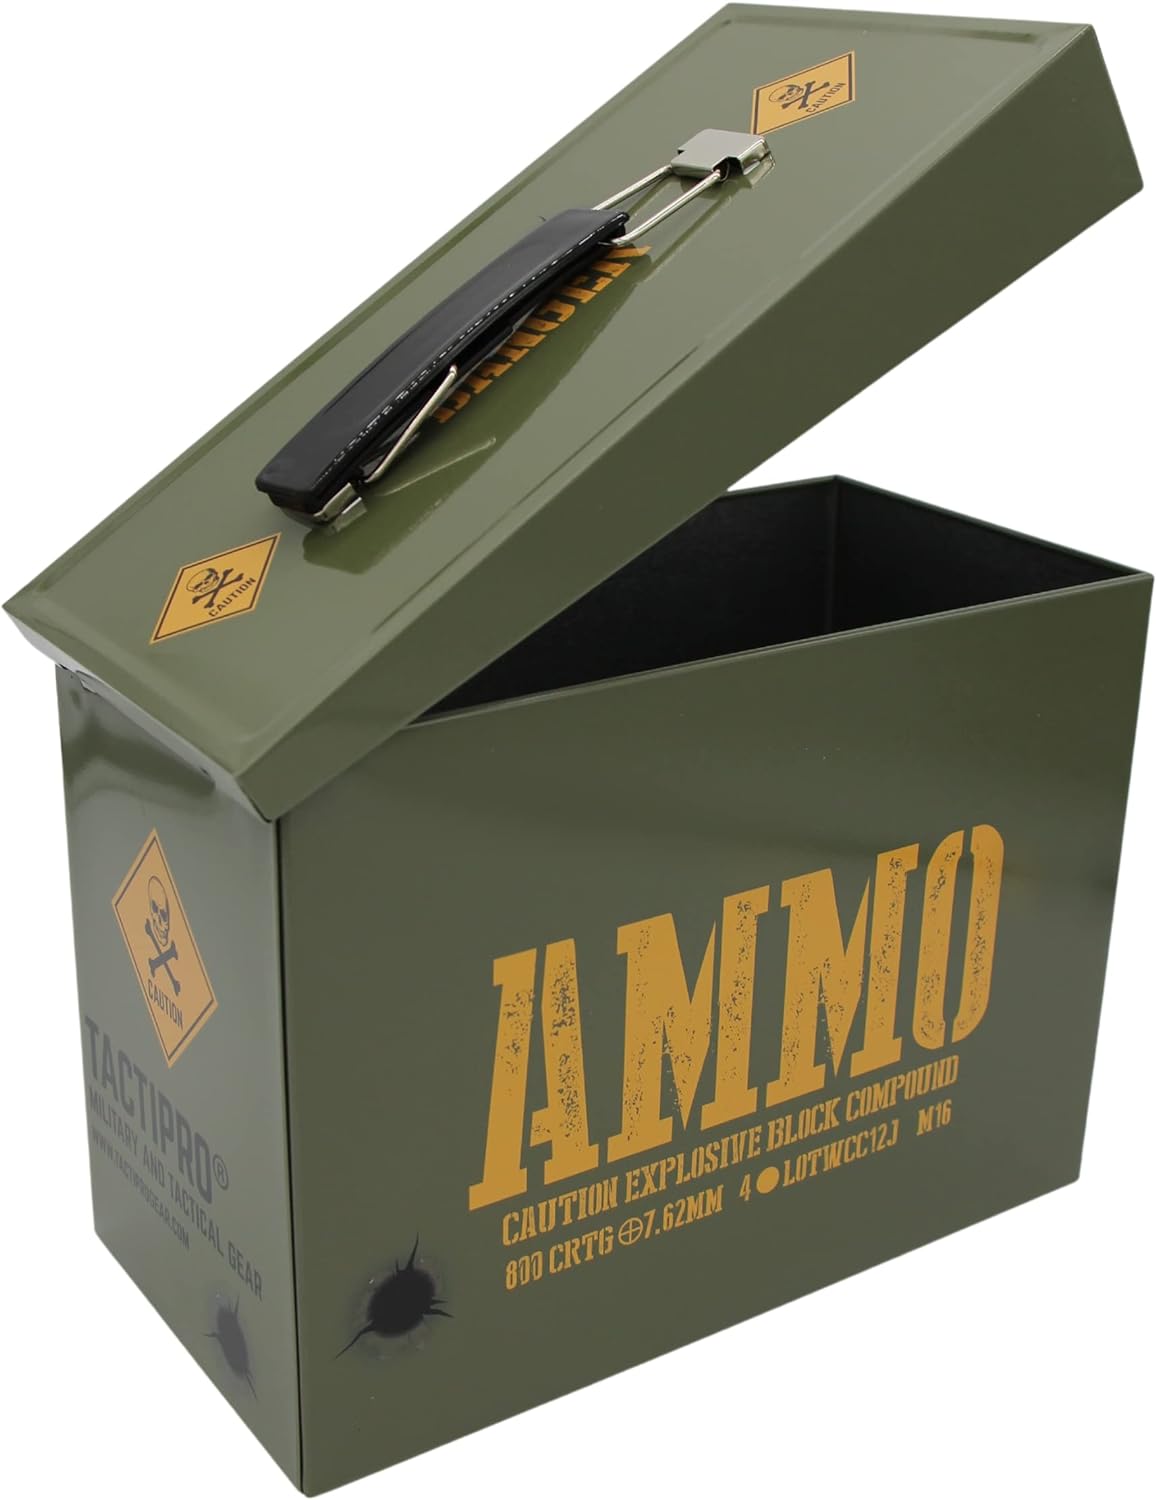 Army Ammo Tin Storage Box container - Lunch Box